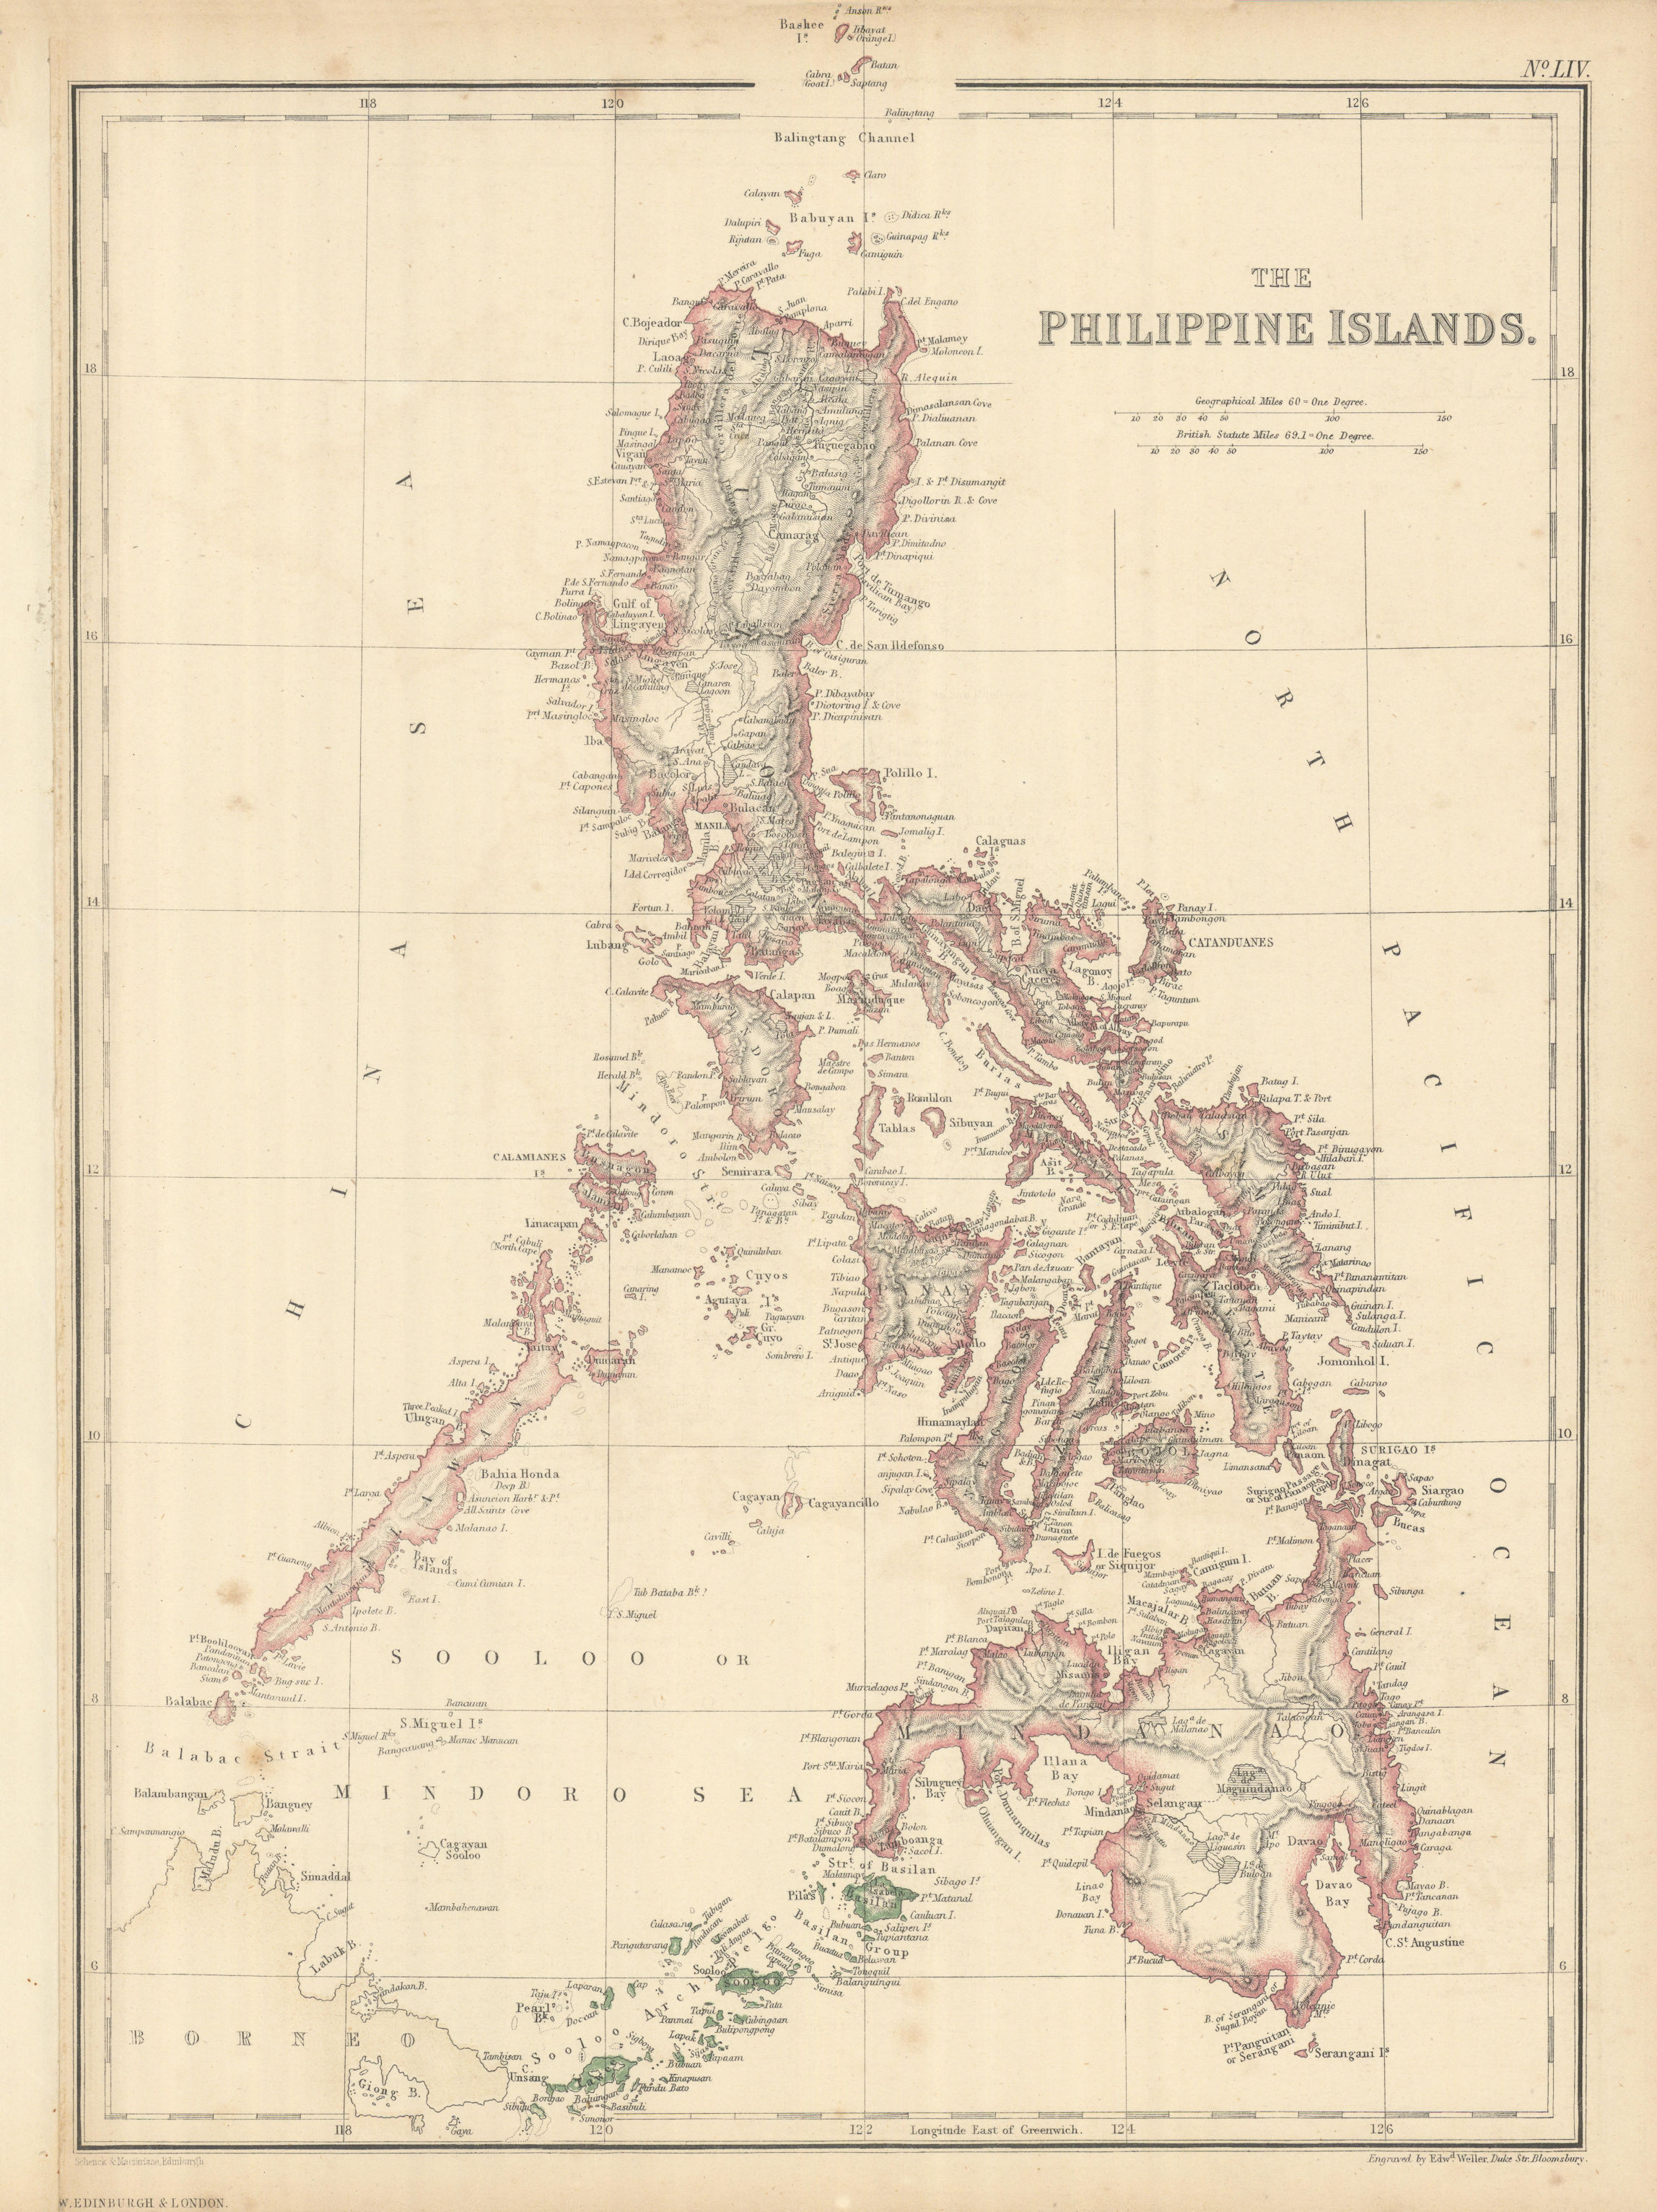 Associate Product The Philippine Islands by Edward Weller. Philippines 1860 old antique map